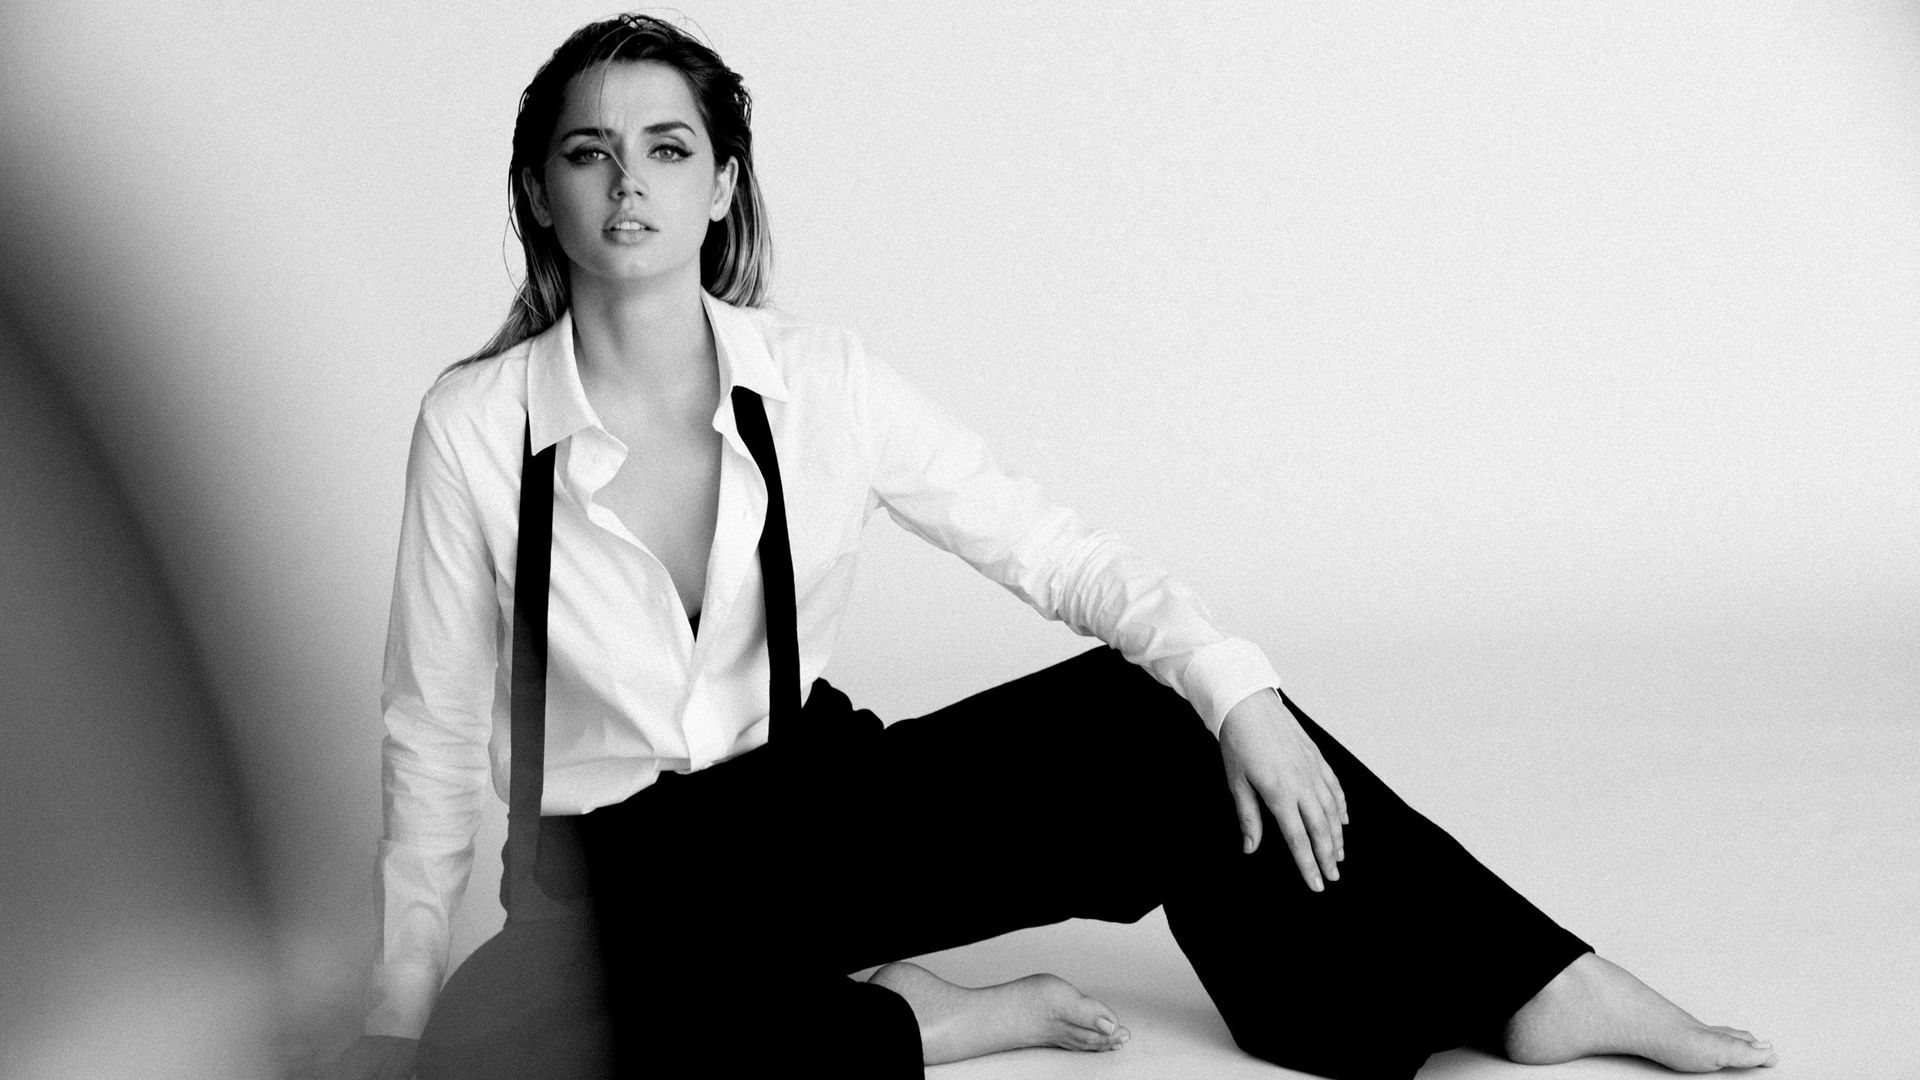 Ana De Armas Is Sitting On The Floor And Wearing White Shirt And Black Pant With Shoulder Belt HD Celebrities Wallpaper